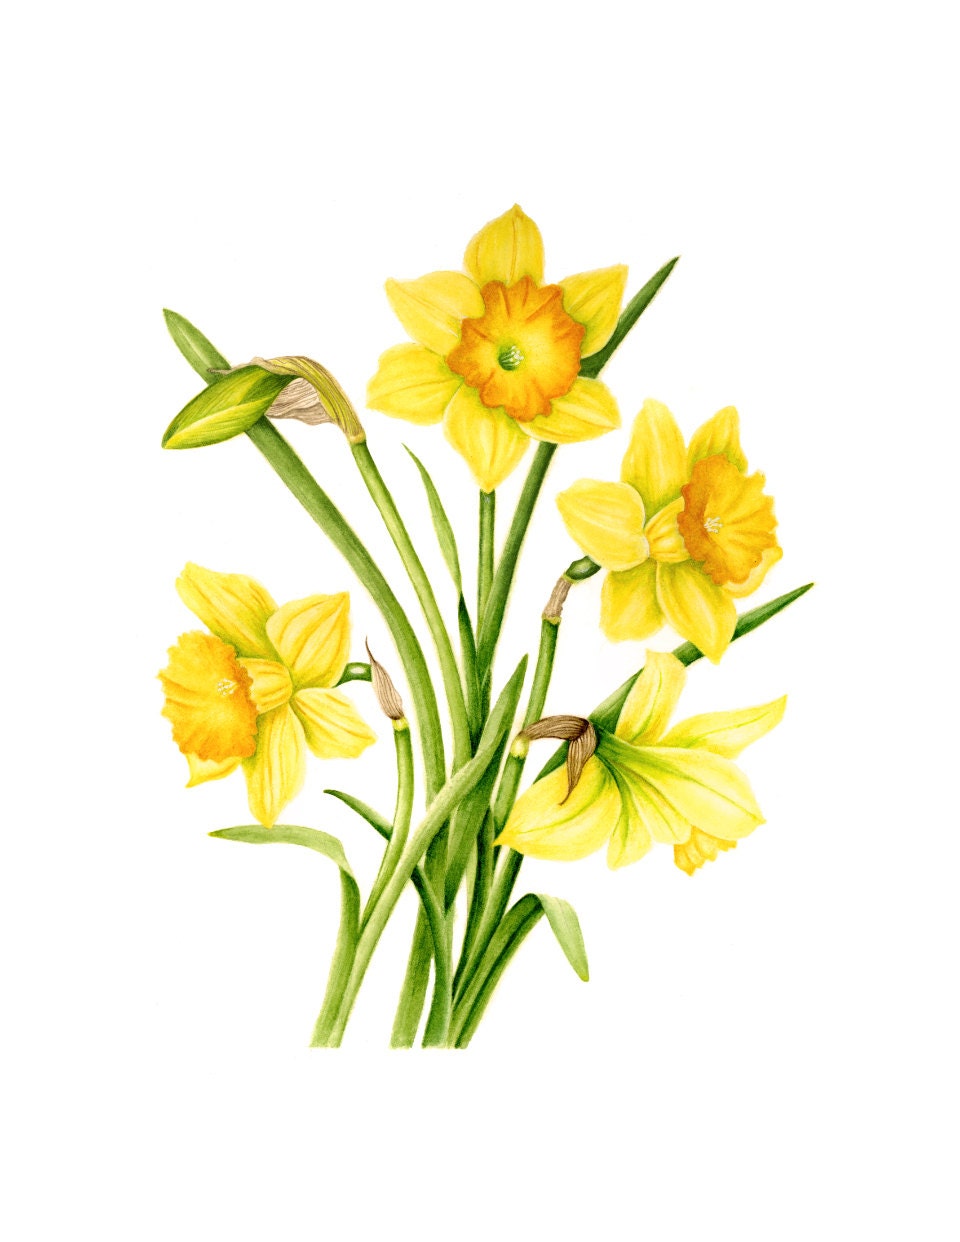 Daffodils - Beautiful Spring Flowers Graphic by Dazzling Illustrations ·  Creative Fabrica